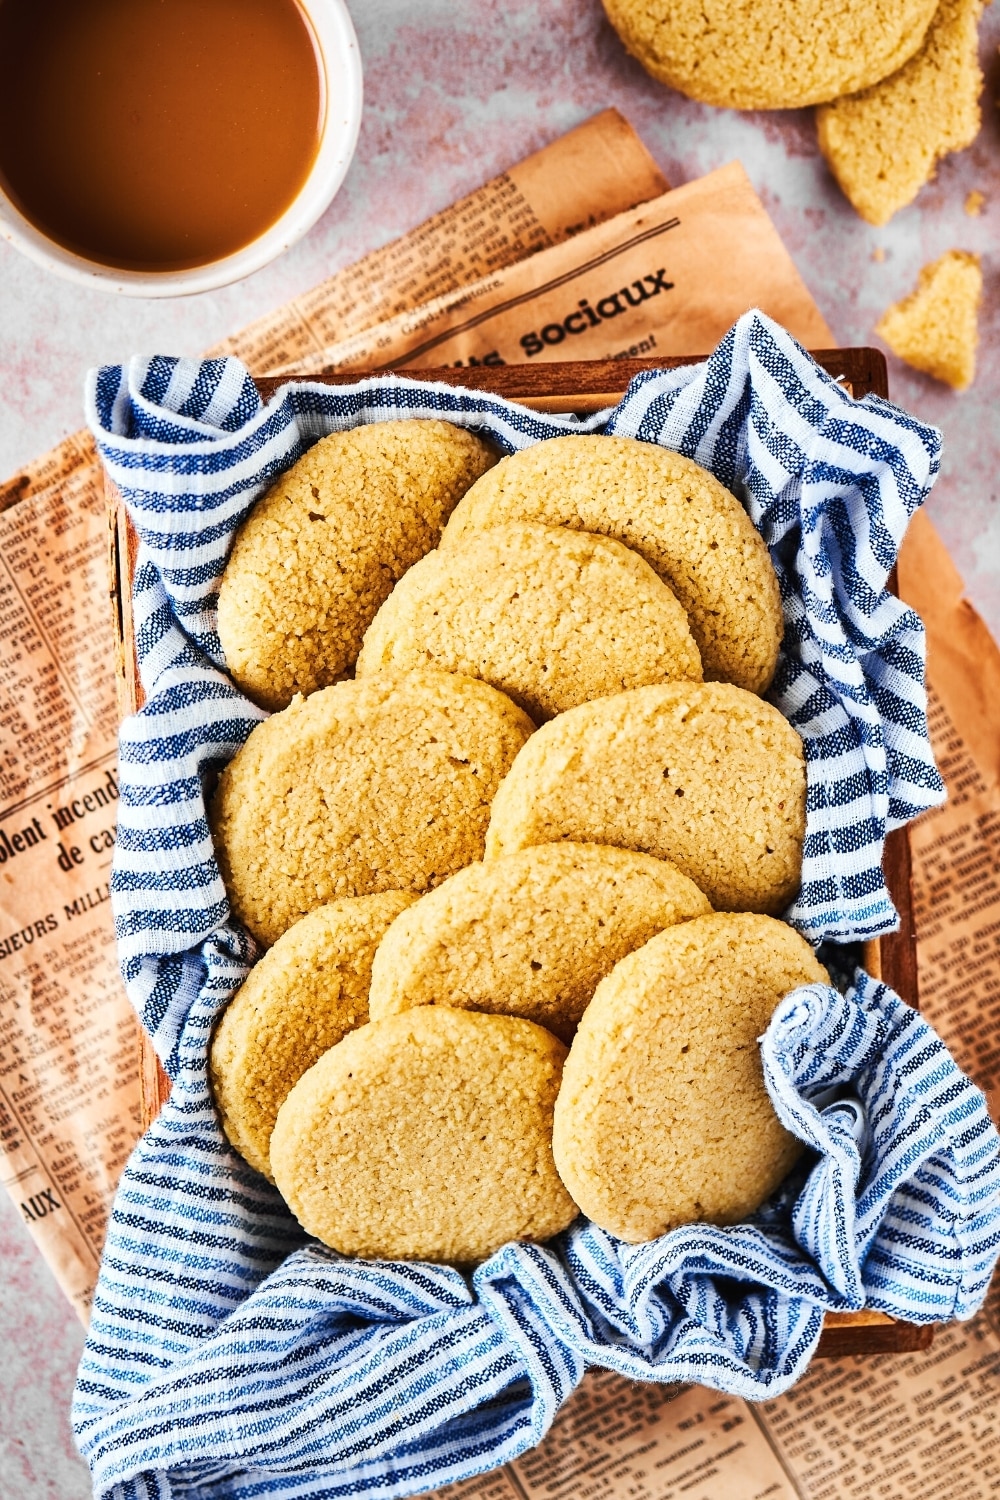 Brown newspaper on a white counter with a basket filled with a bunch of shortbread cookies overlapping one another in it. The shortbread cookies are on a white and blue striped tablecloth and behind it is part of a cup of coffee and parts of other shortbread cookies.